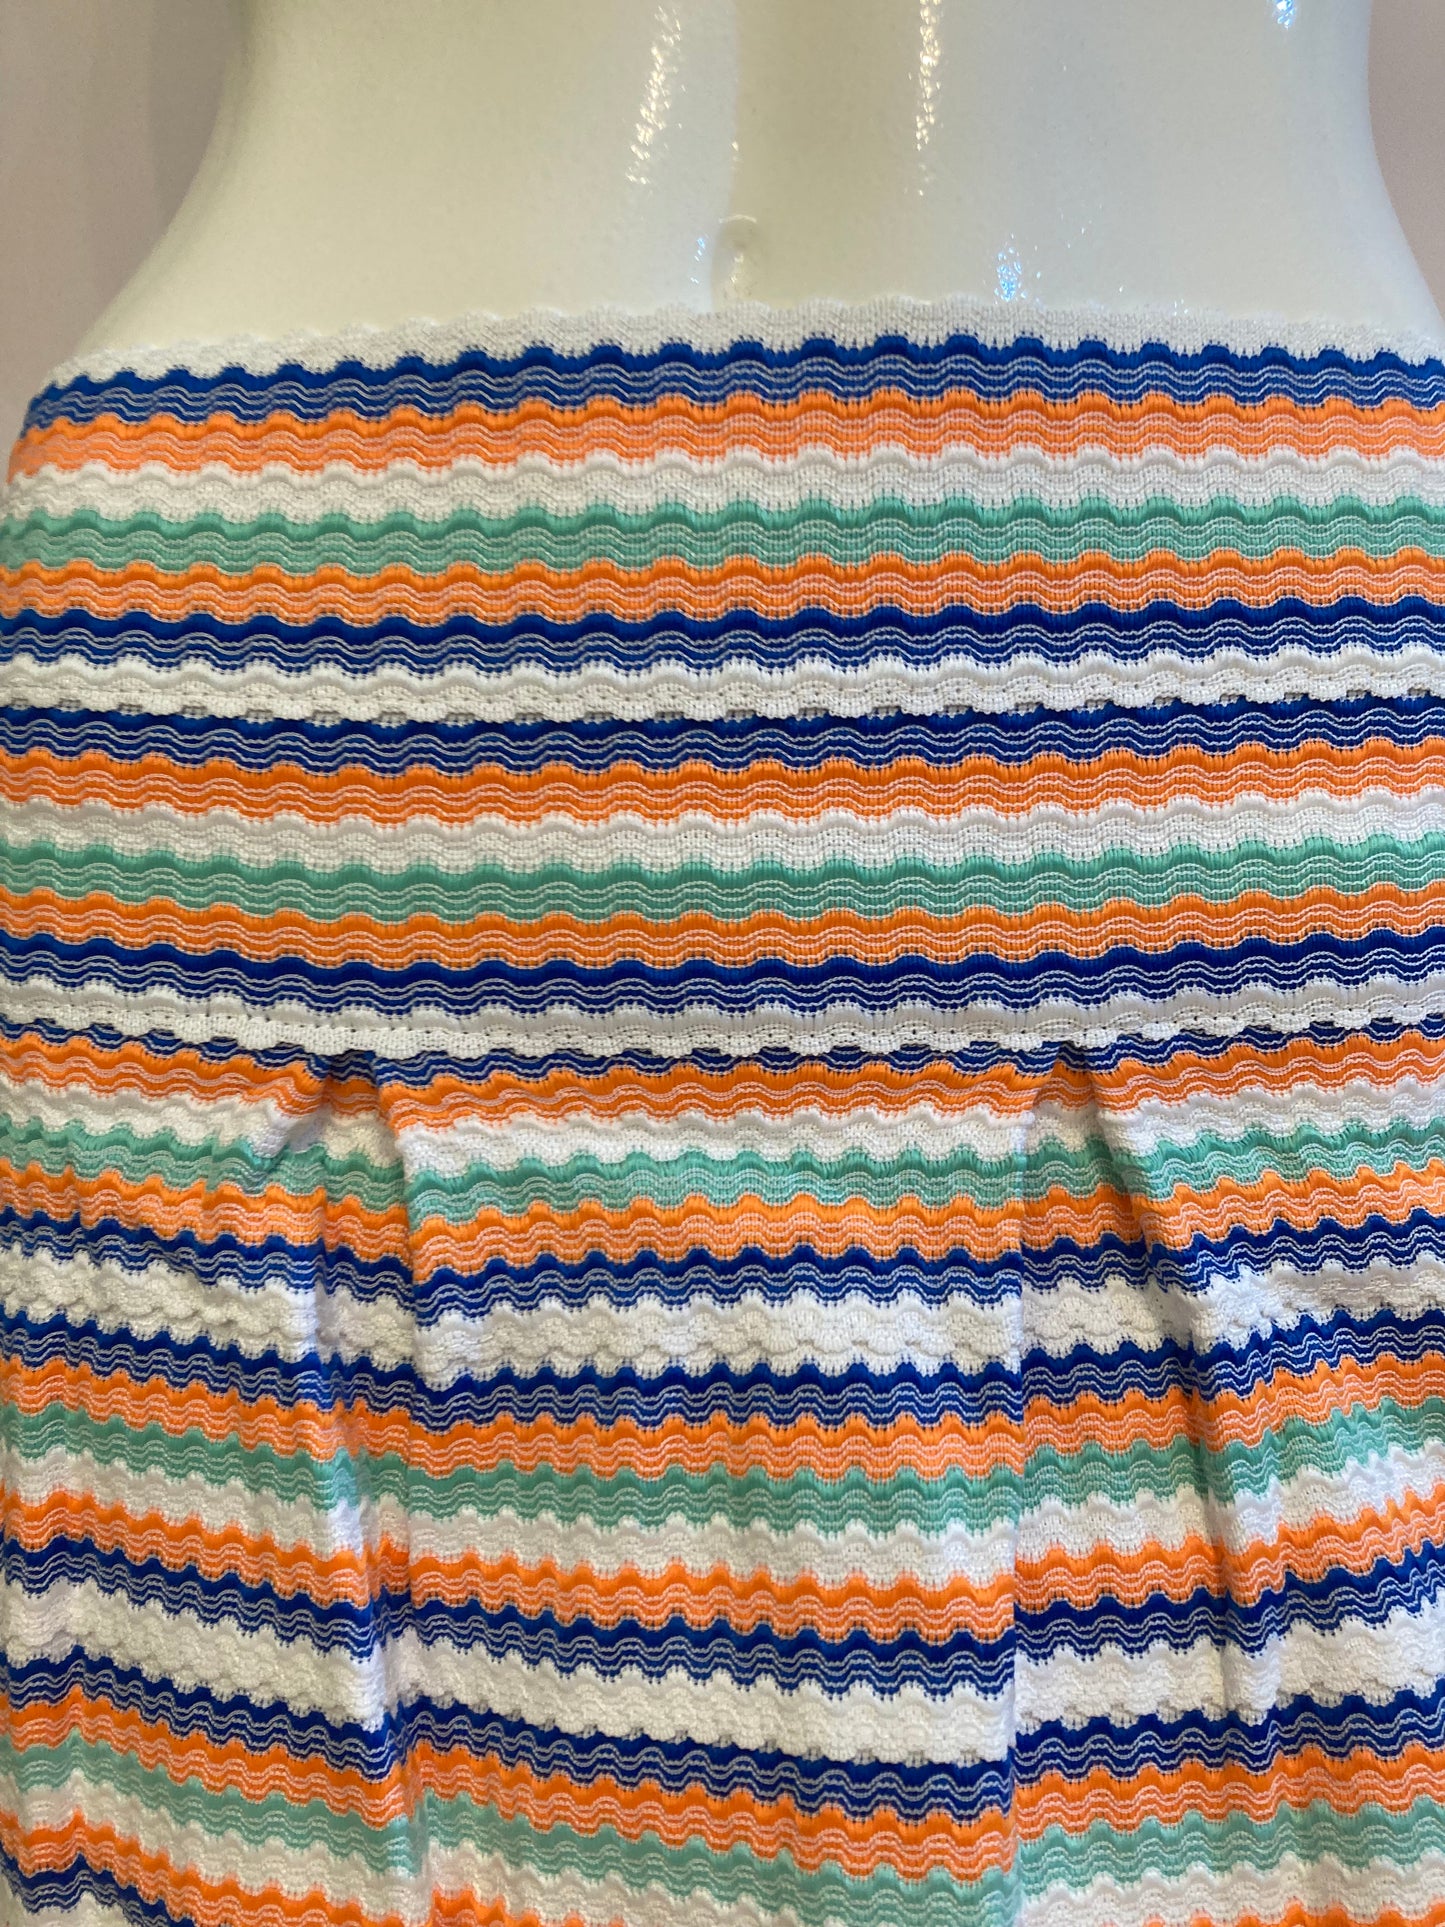 Orange striped skirt with pleats and back closure